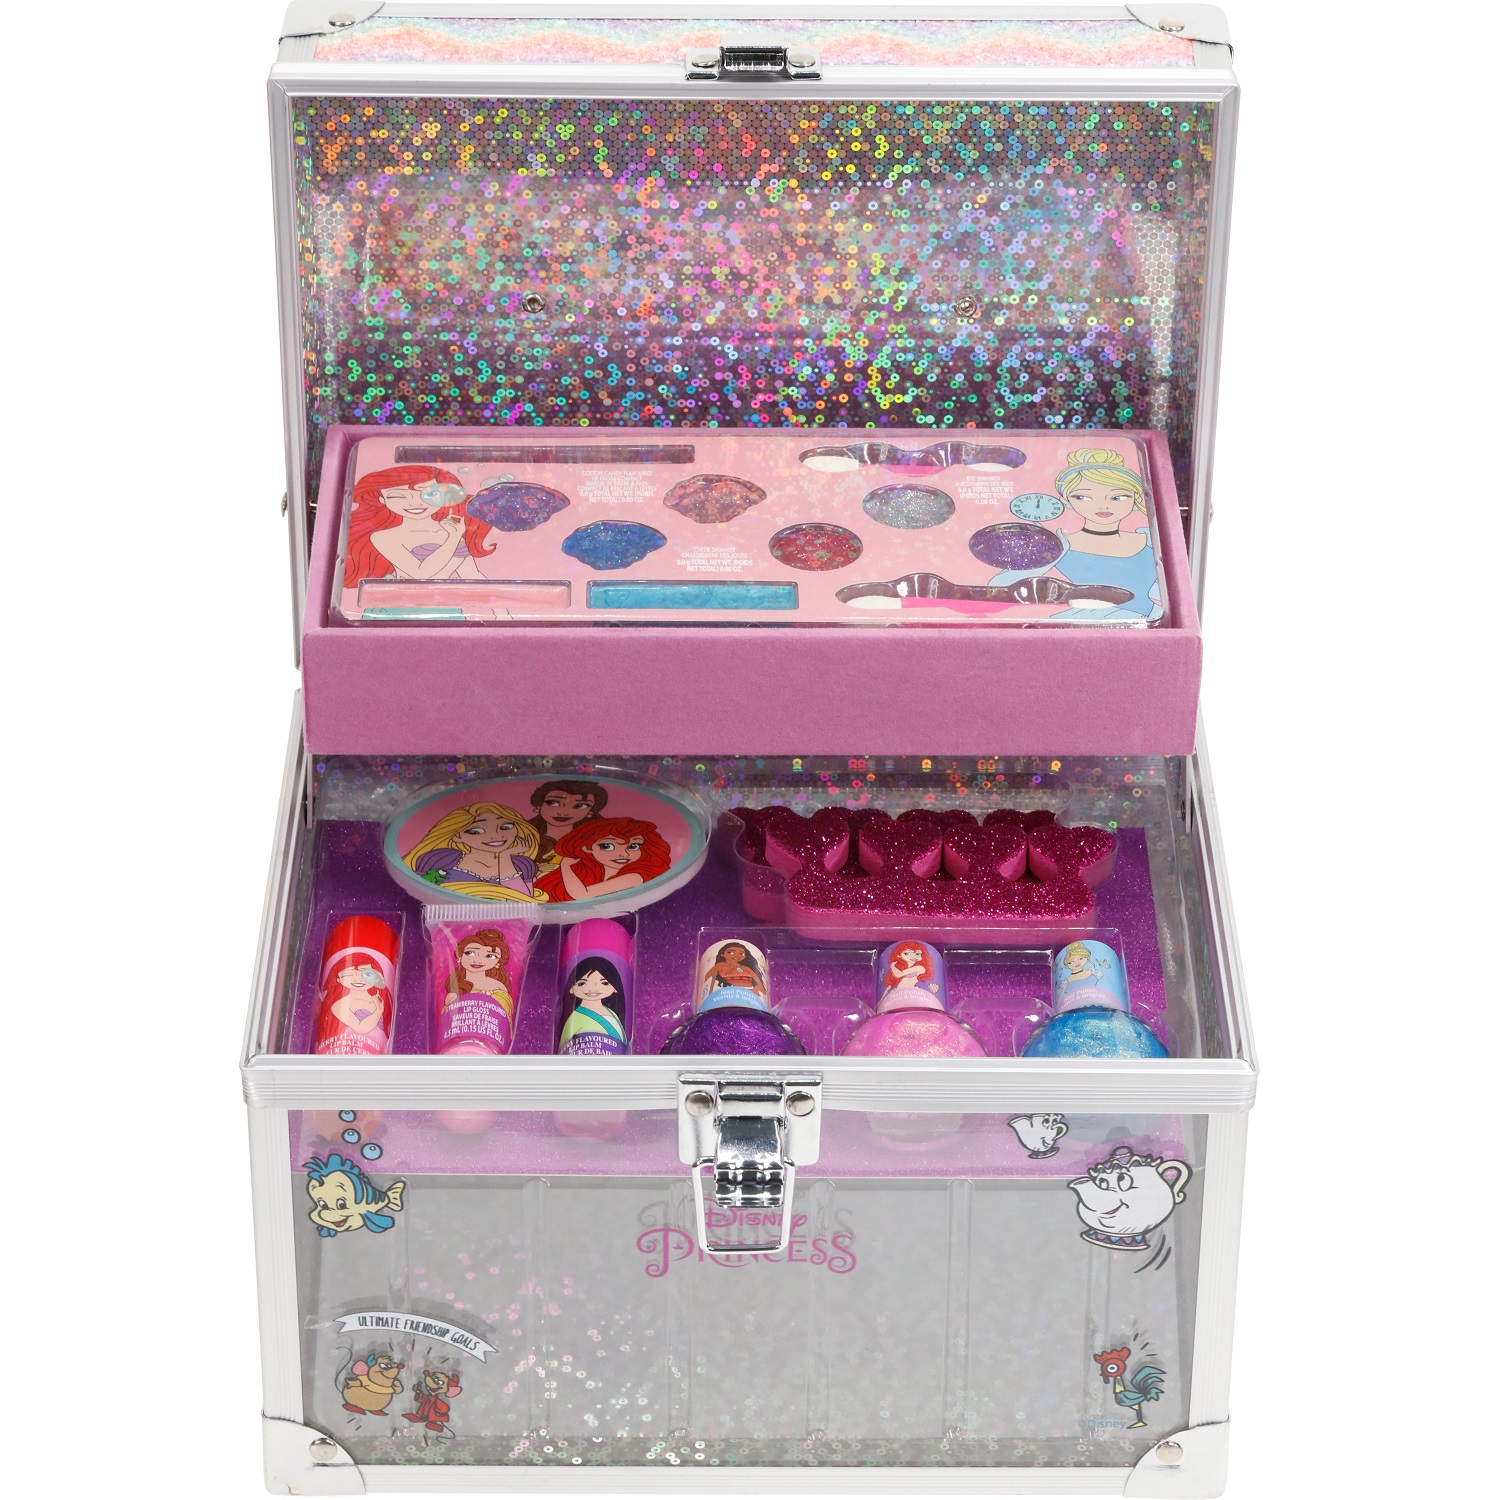 Disney Princess Train Case Pretend Play Cosmetic Set- Kids Beauty, Toy, Gift for Girls, Ages 3+ by Townley Girl - image 1 of 10